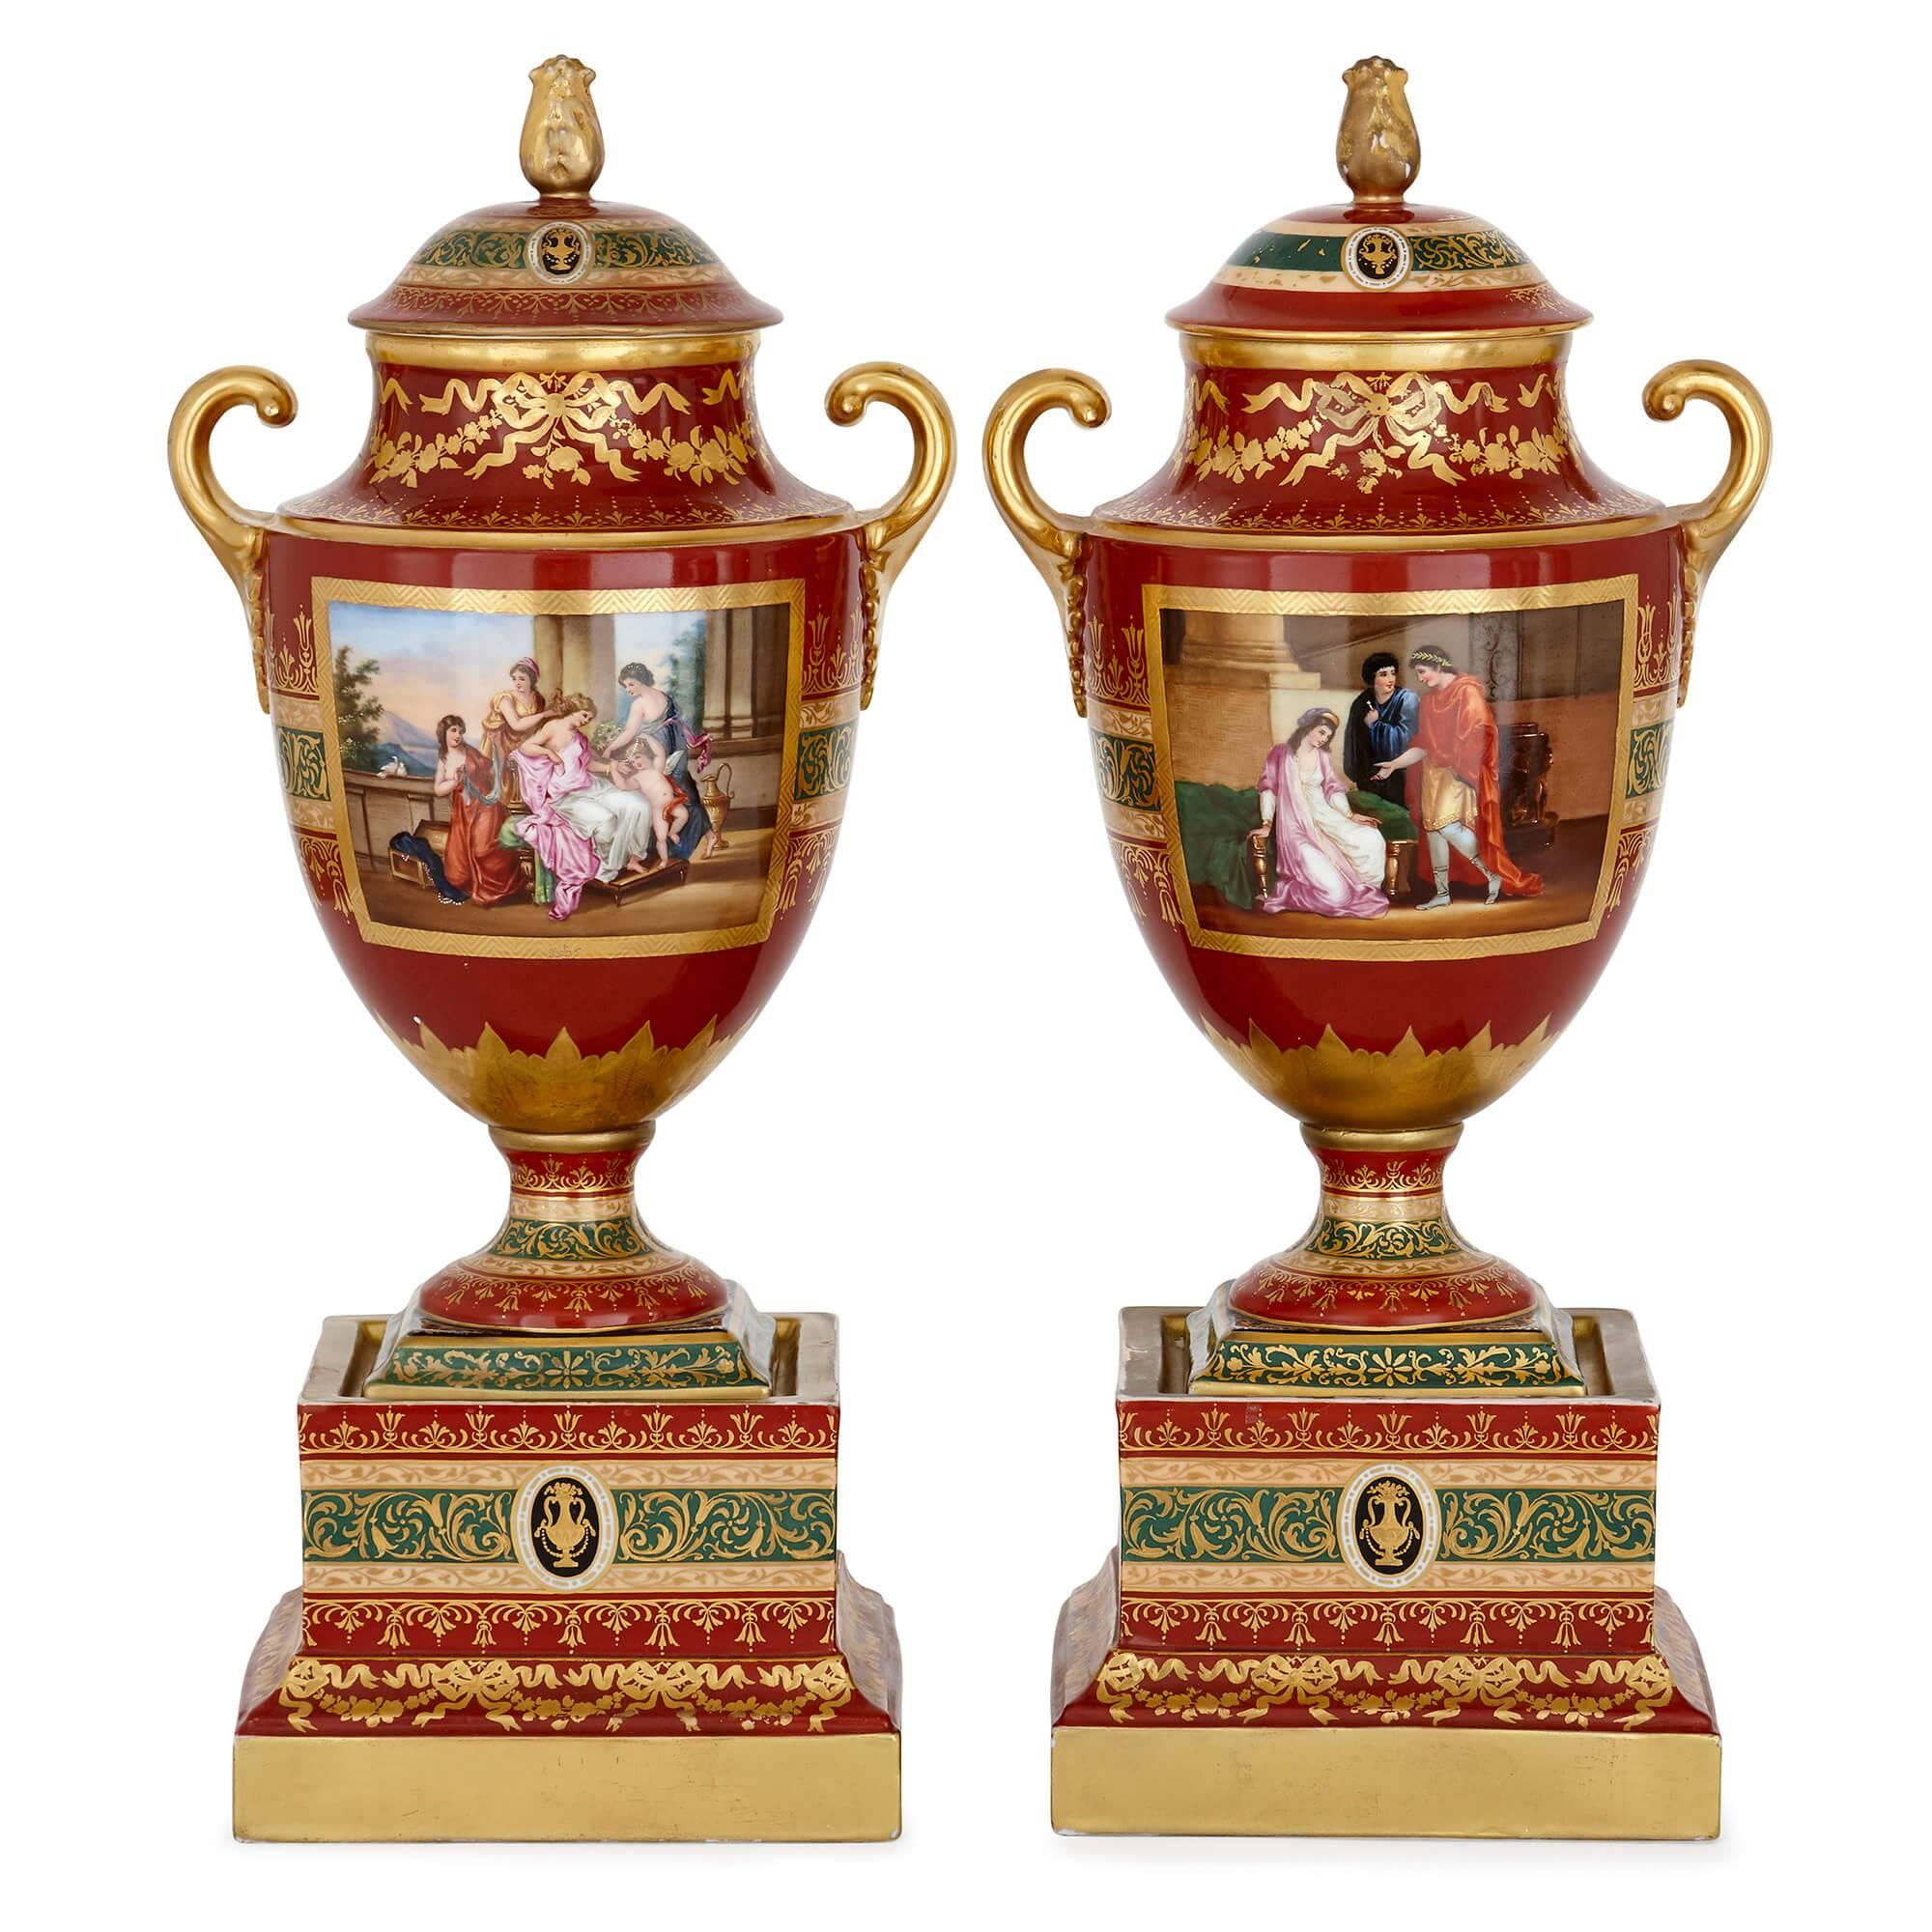 The beautiful coloring on this striking pair of vases makes them an excellent match for a wide range of interior styles, from the classical to the contemporary. The vases are the work of the Royal Vienna factory, Austria's foremost producer of fine